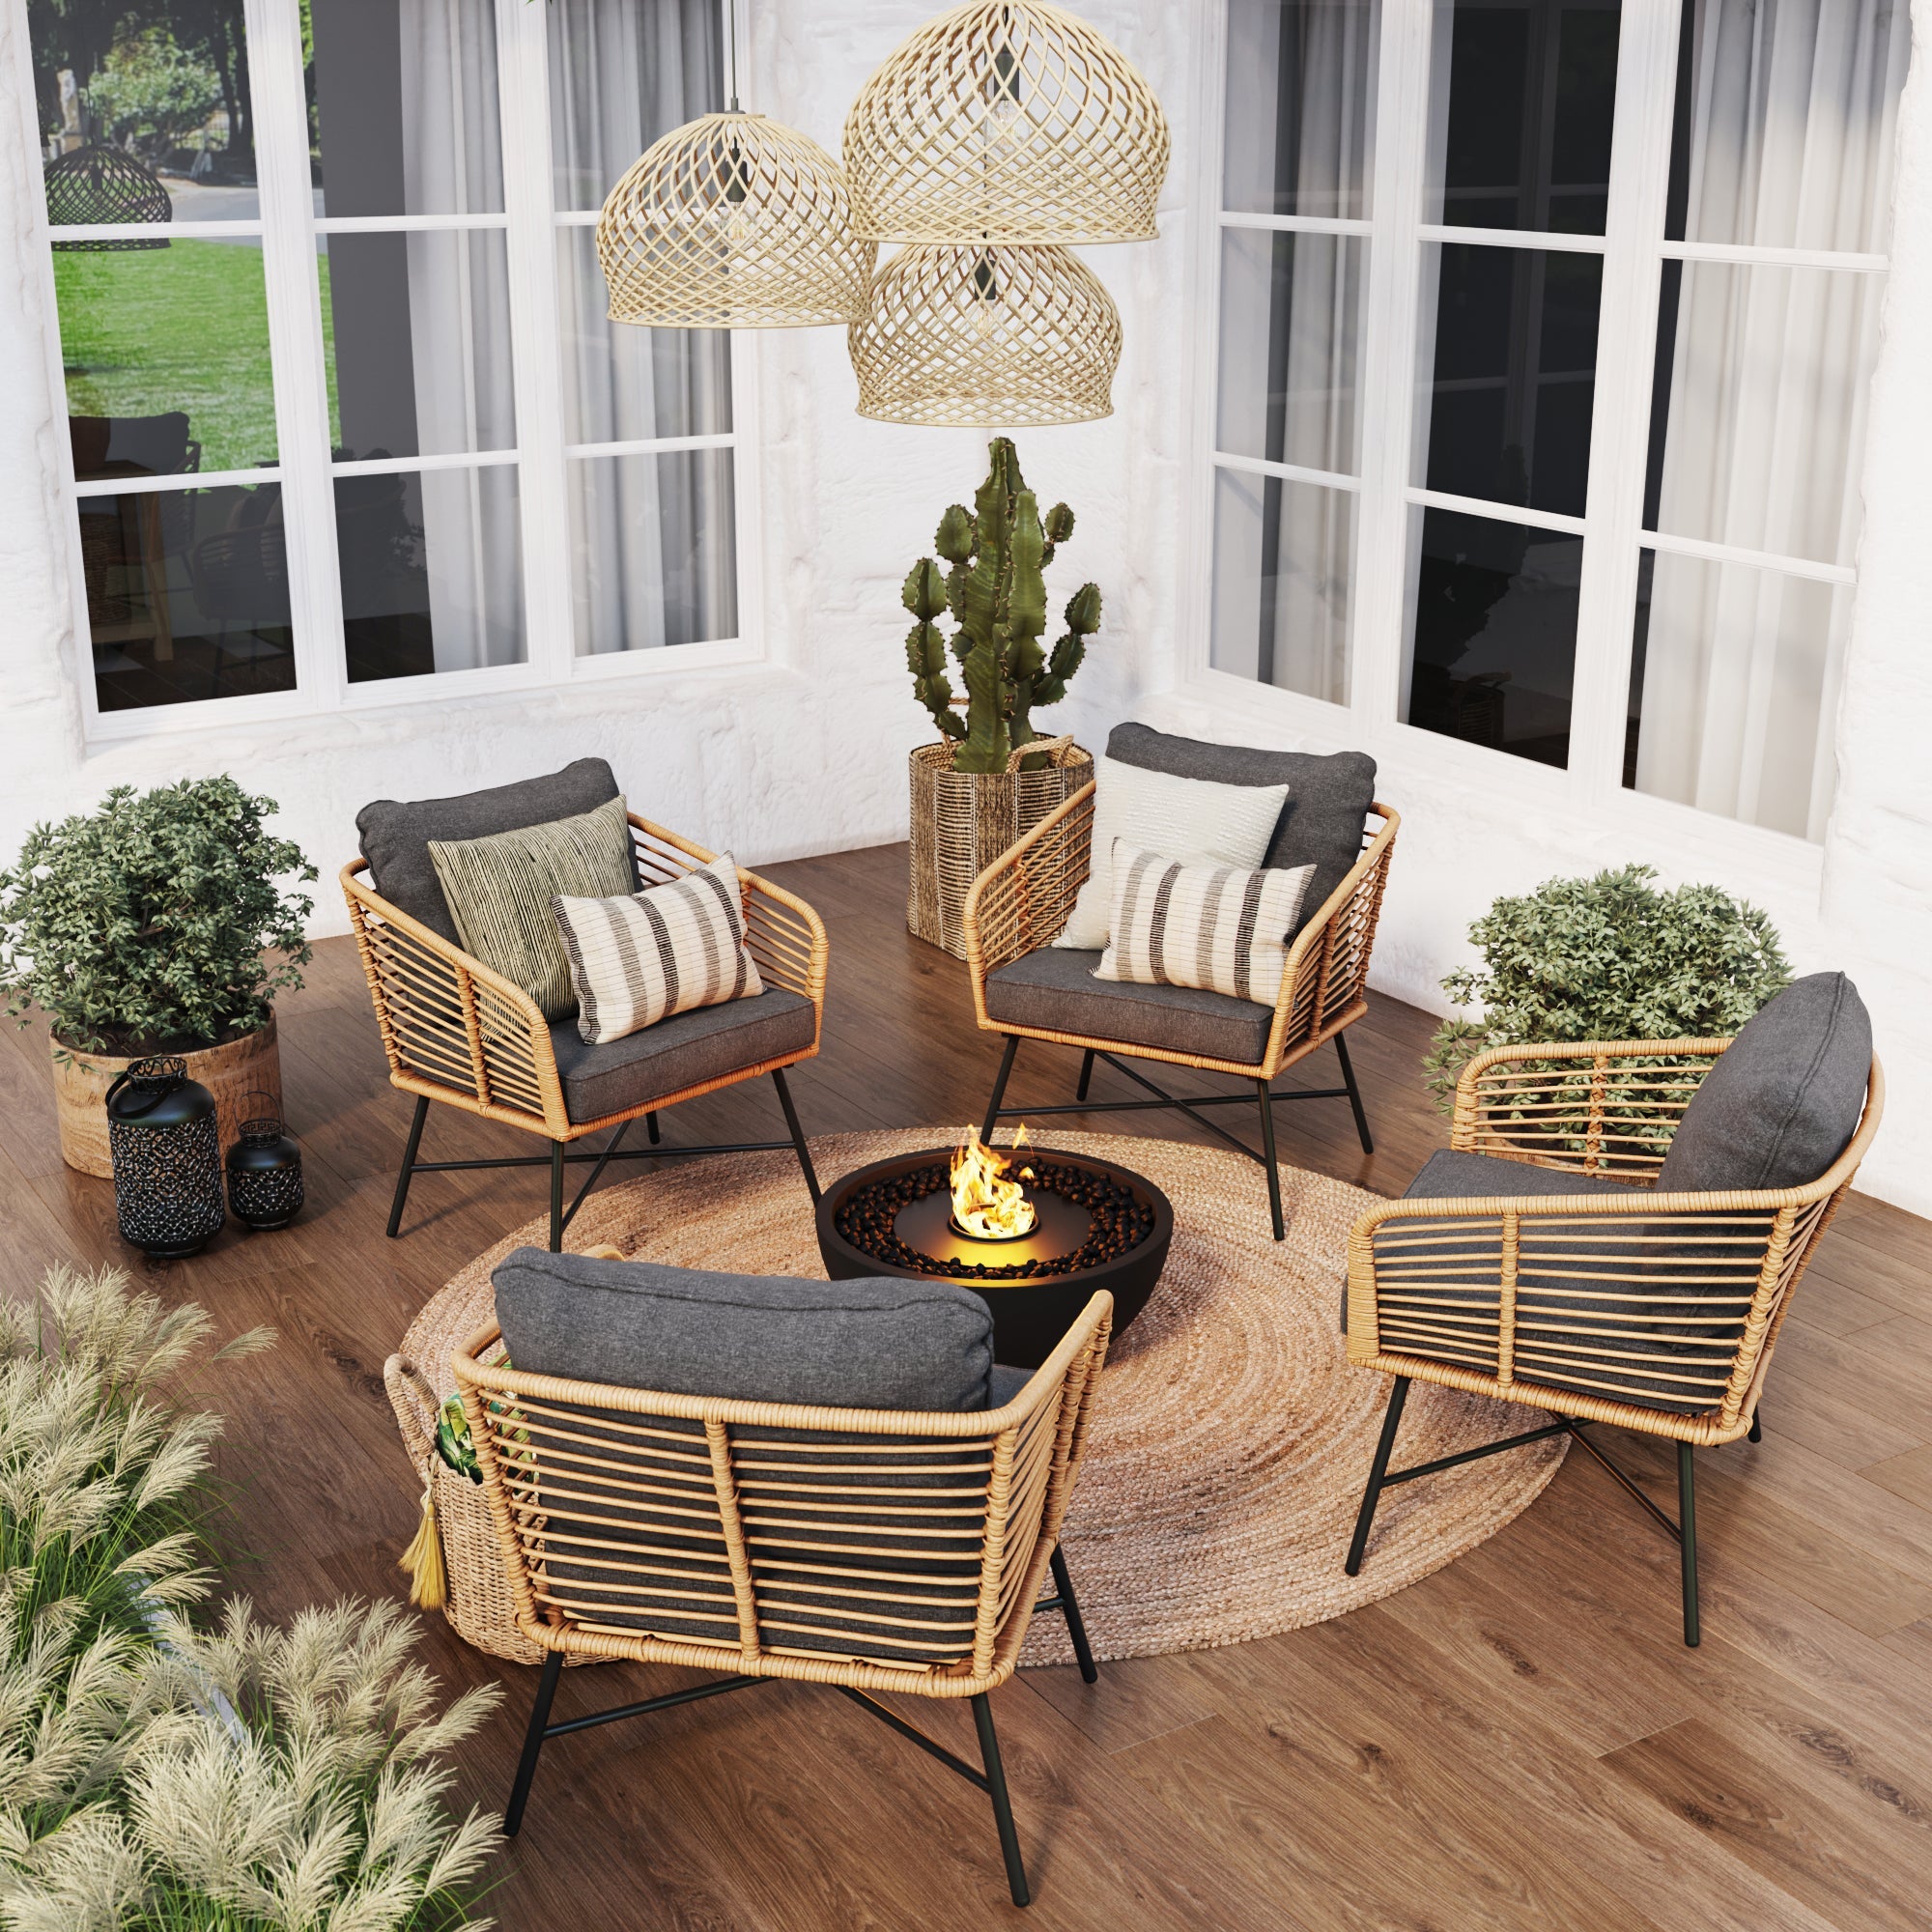 Wicker Outdoor Set of 4 Patio Arm Chairs